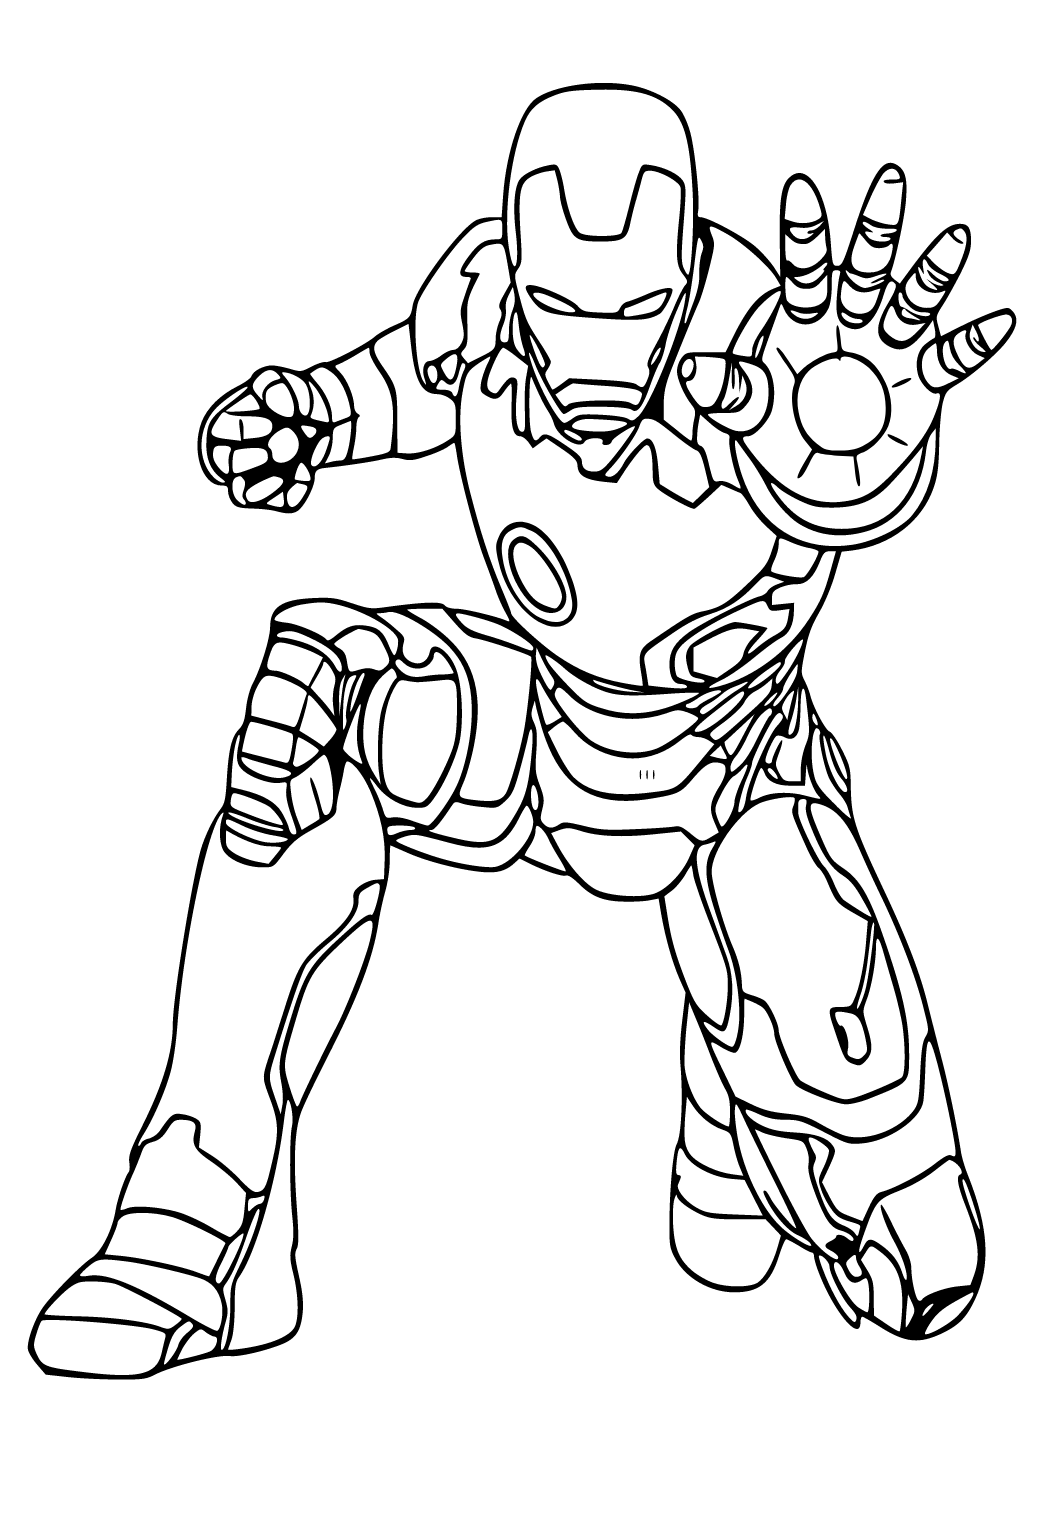 Free printable avengers iron man coloring page for adults and kids